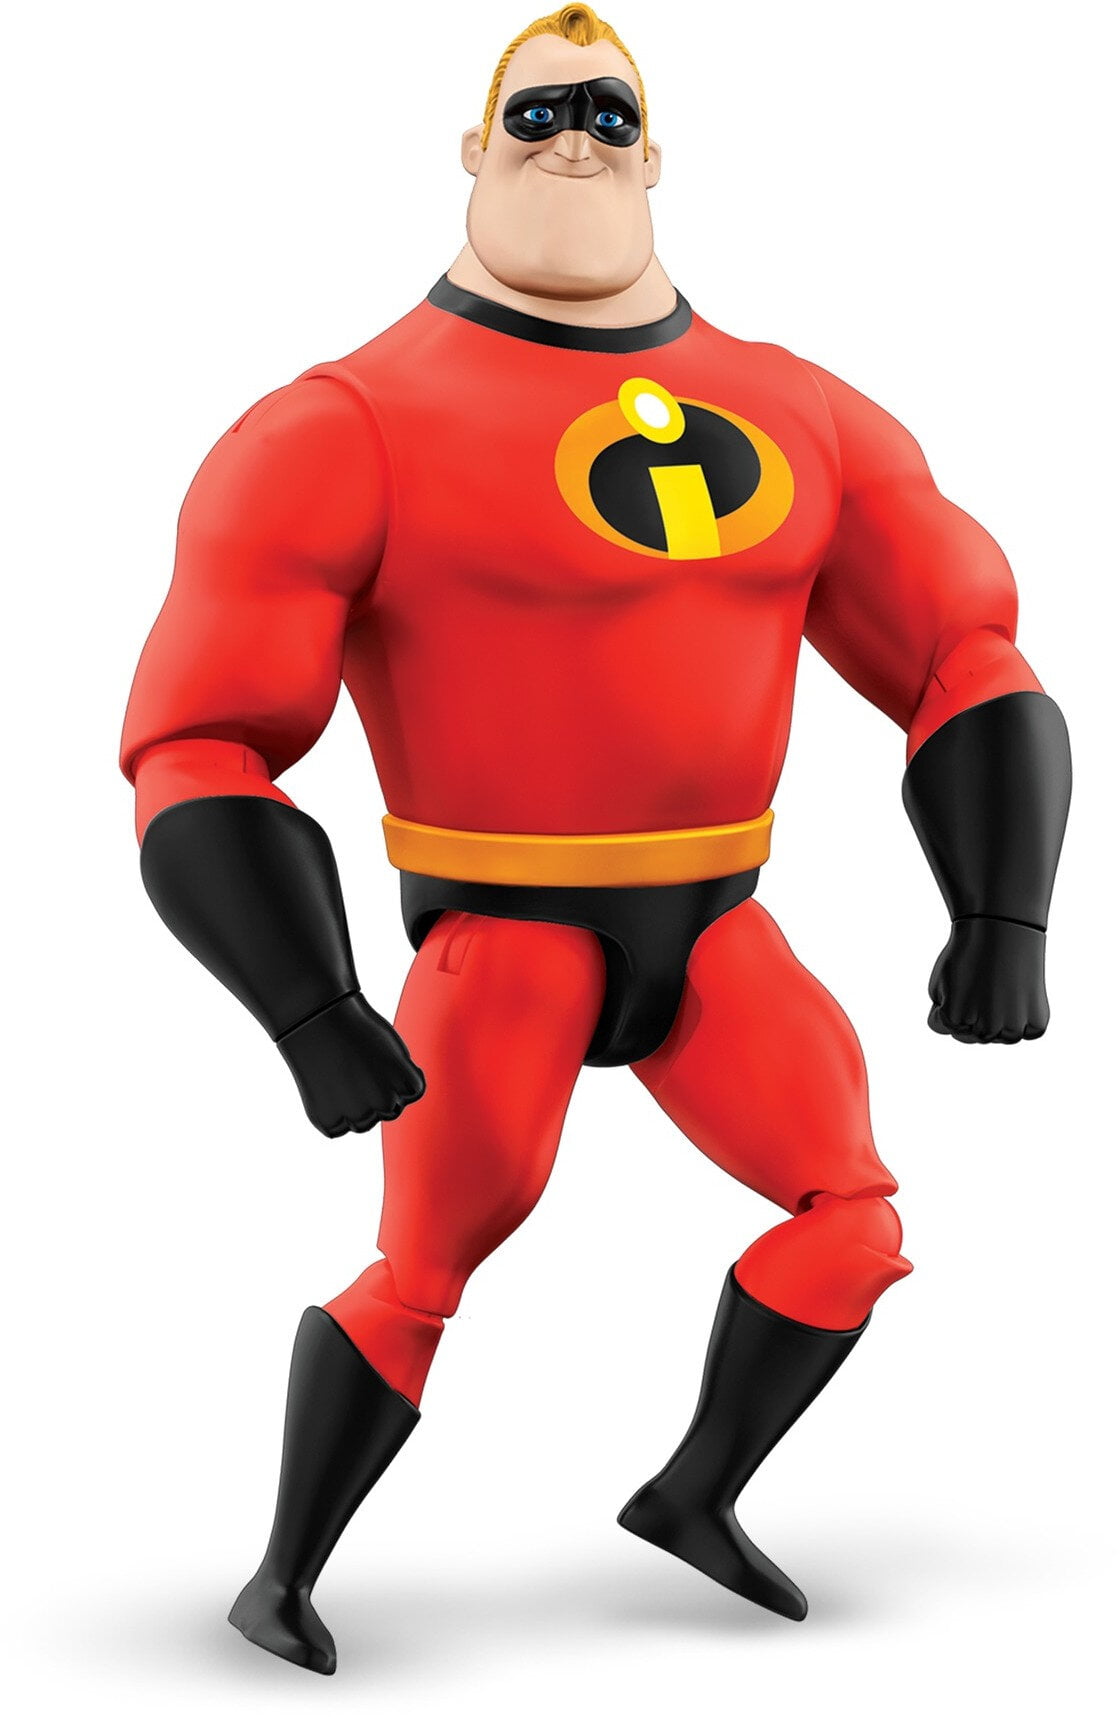 Disney Incredibles 2 Mr Incredible Light-Up Talking Action Ages 3 Toy Play Gift 